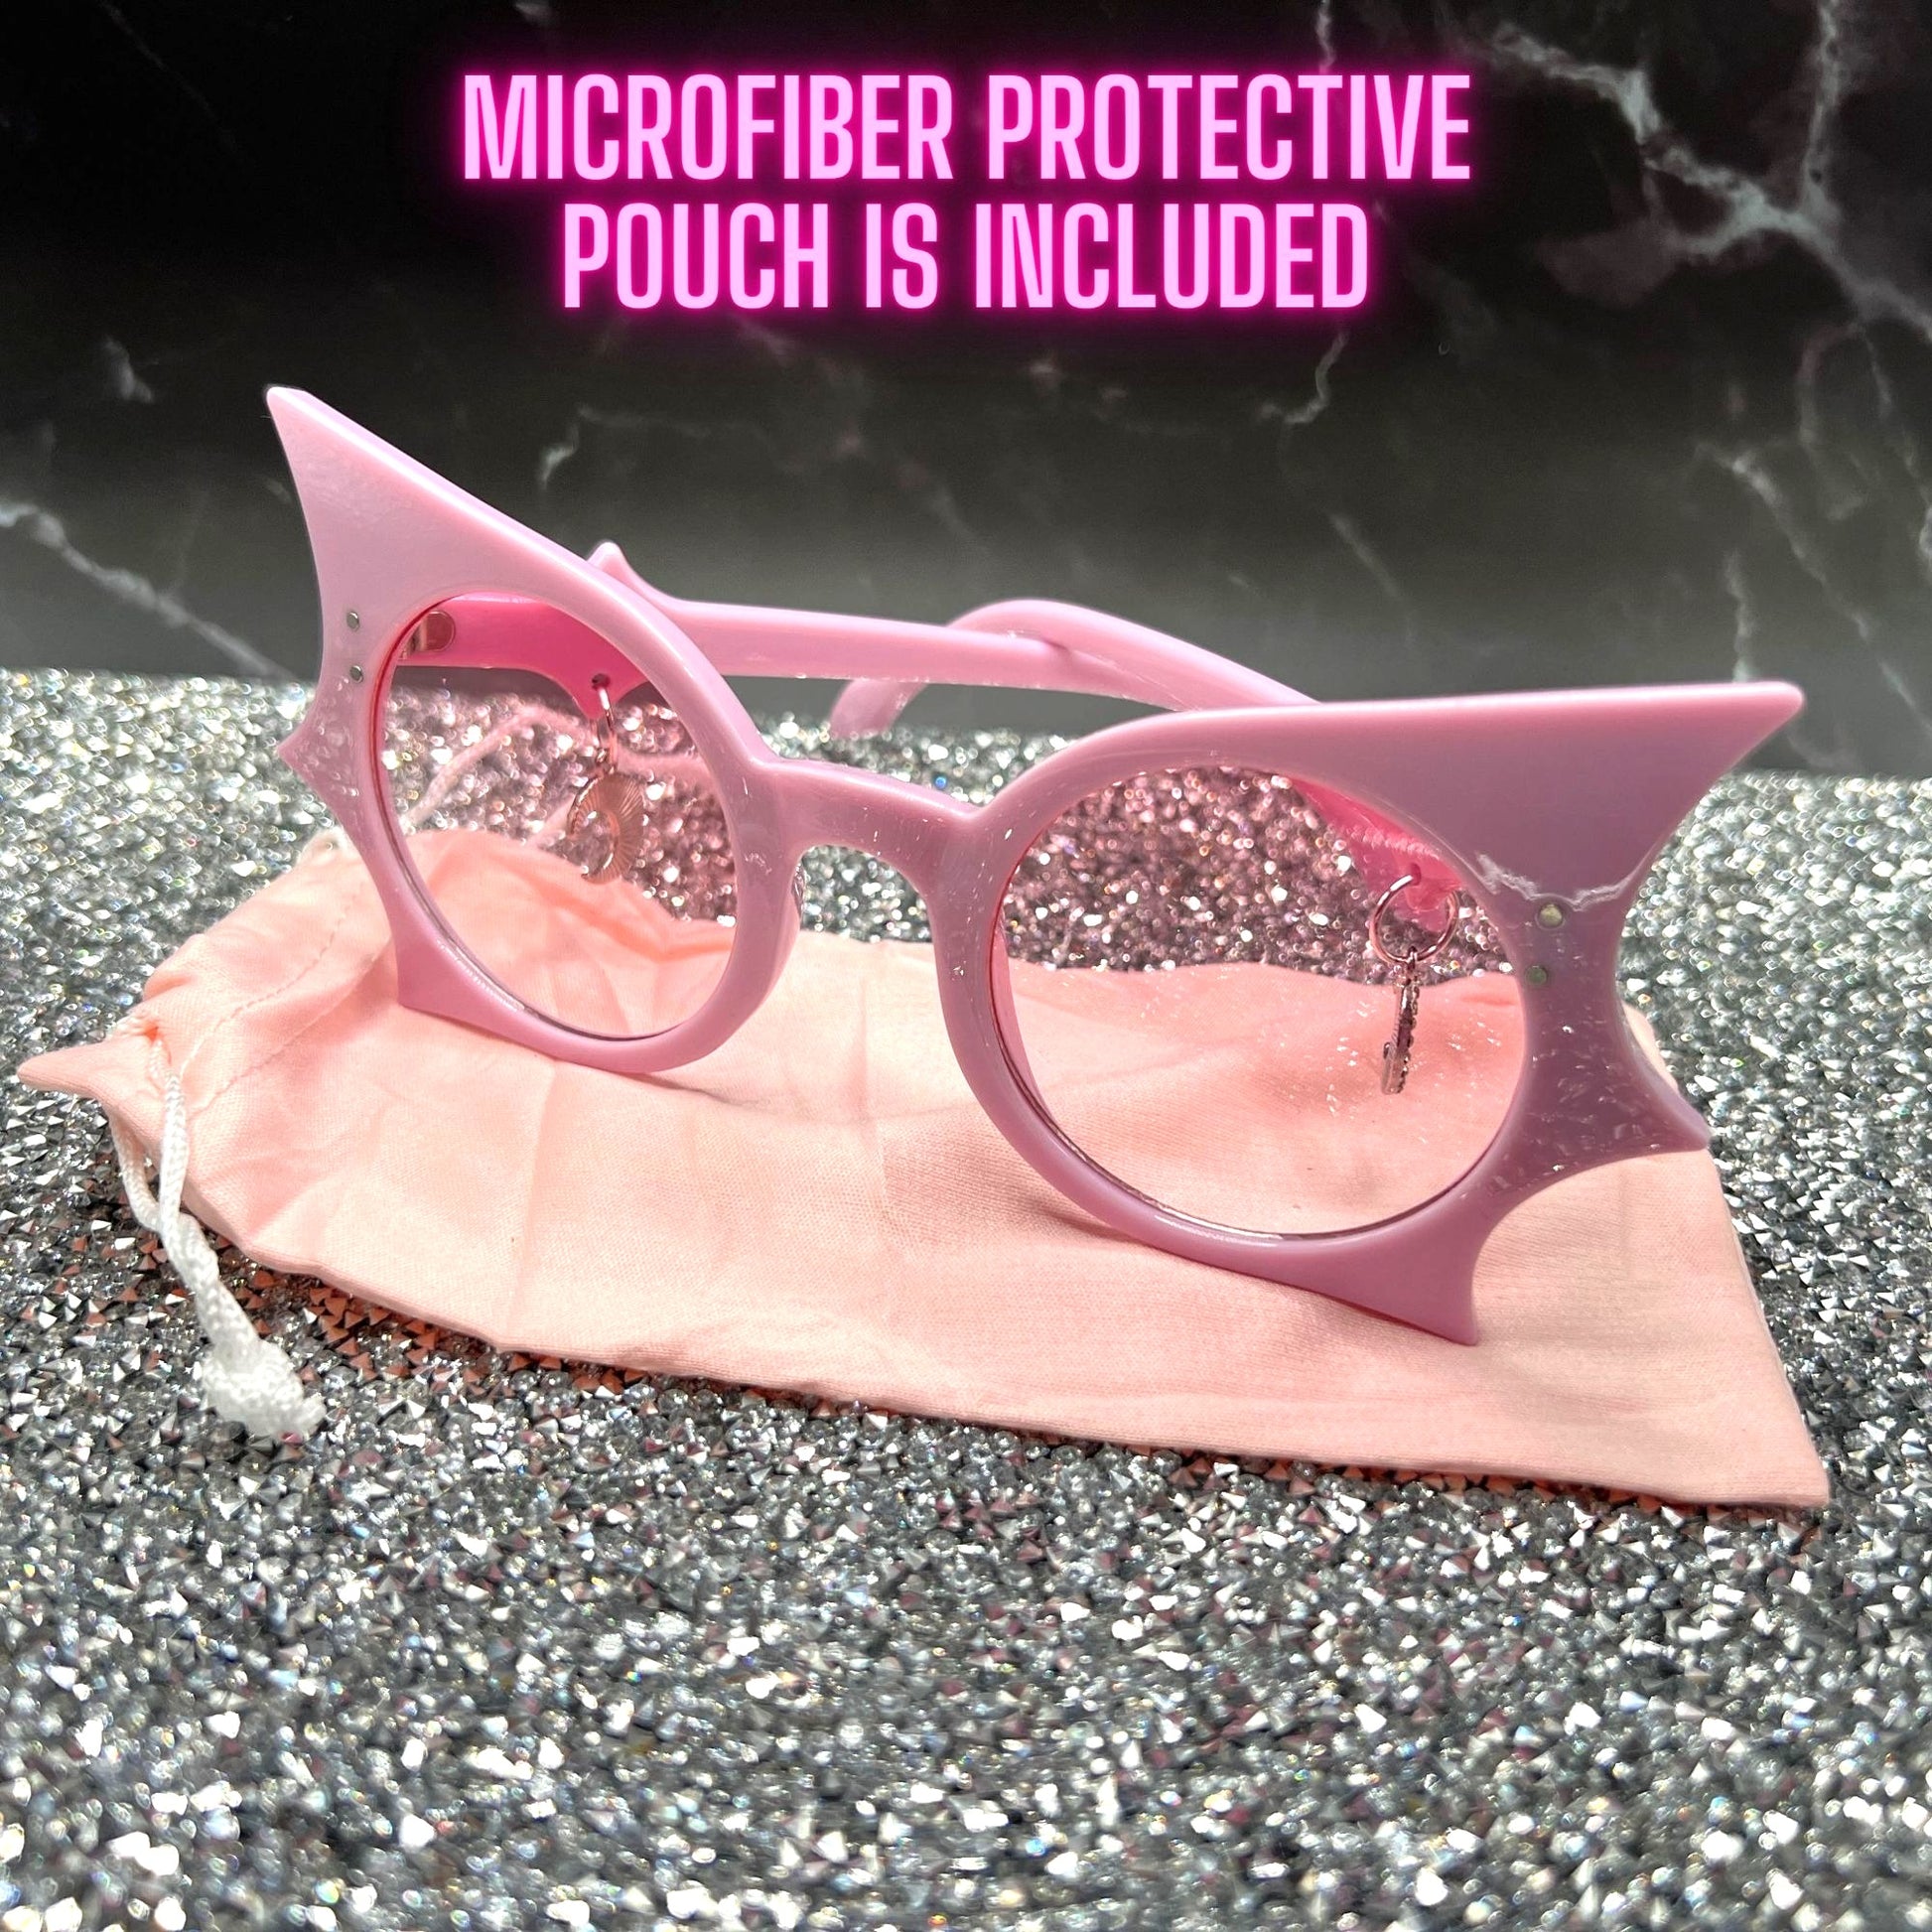 "Pastel pink bat sunglasses with moon charms. Displayed on a glittery table with a pink microfiber cloth pouch that is included.